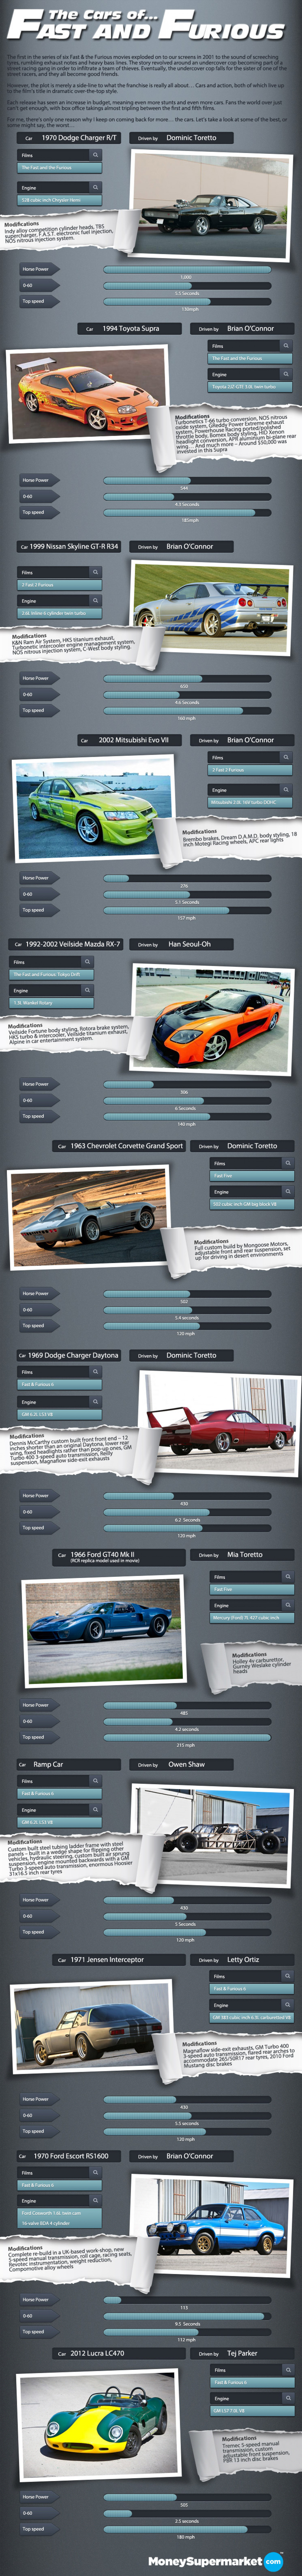 The cars of the Fast and the Furious Movies Infographic